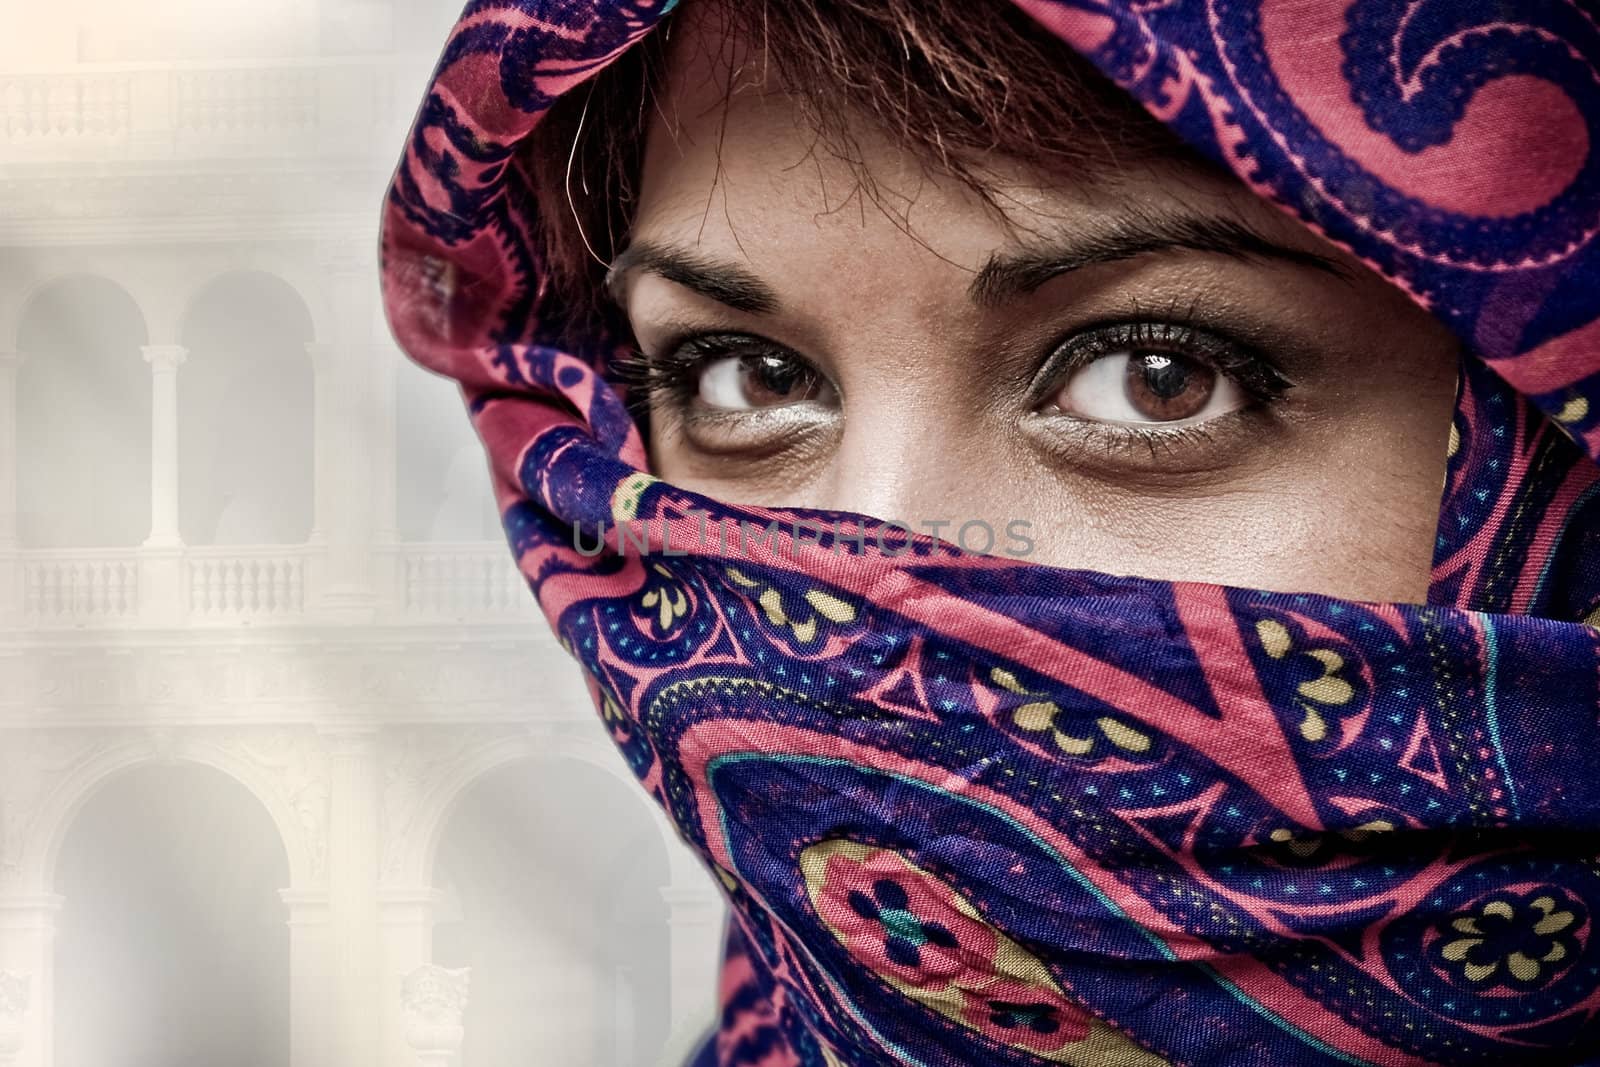 An attractive middle eastern woman wearing a colorful head covering.